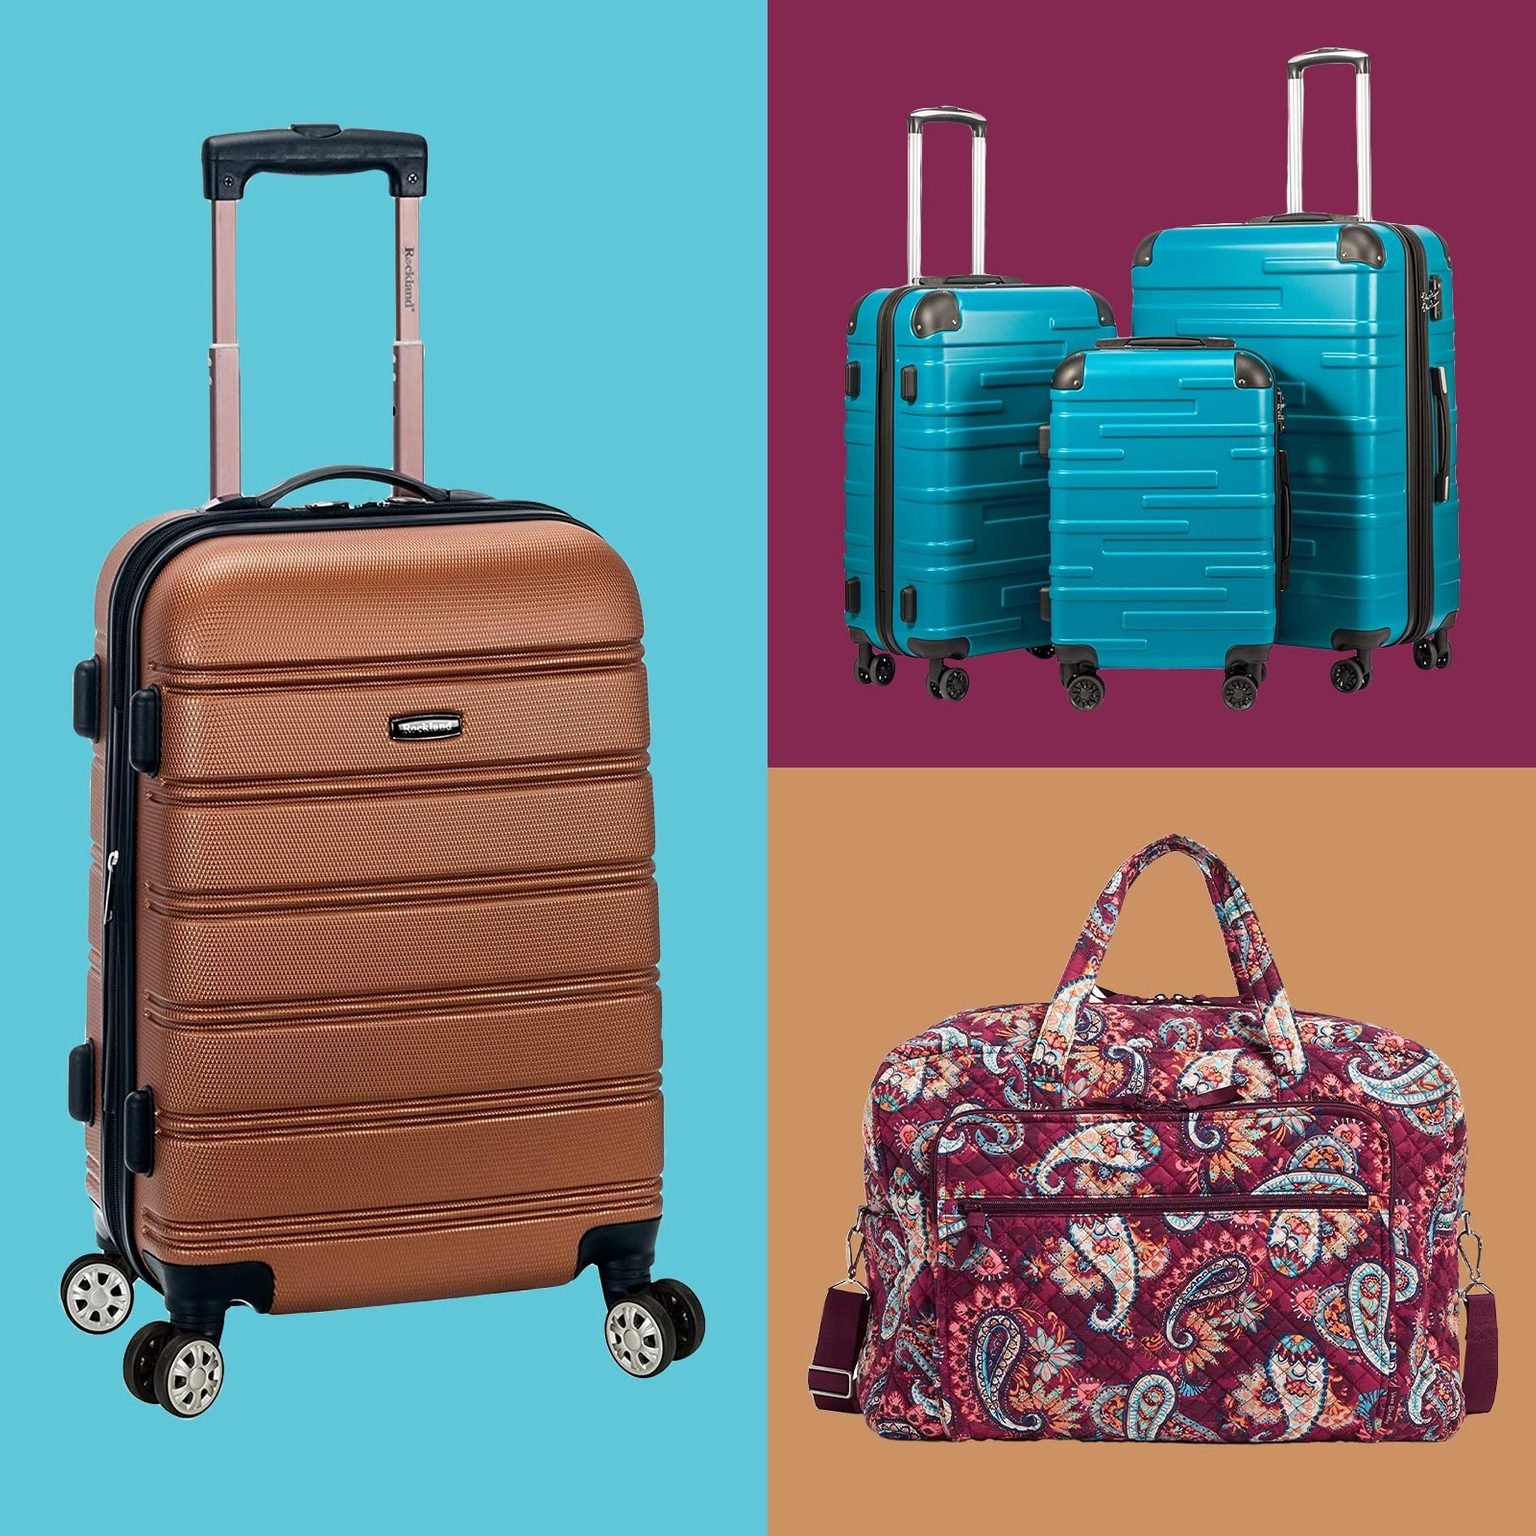 15 Best Amazon Carry On Luggage to Bring on Your Next Flight 2023